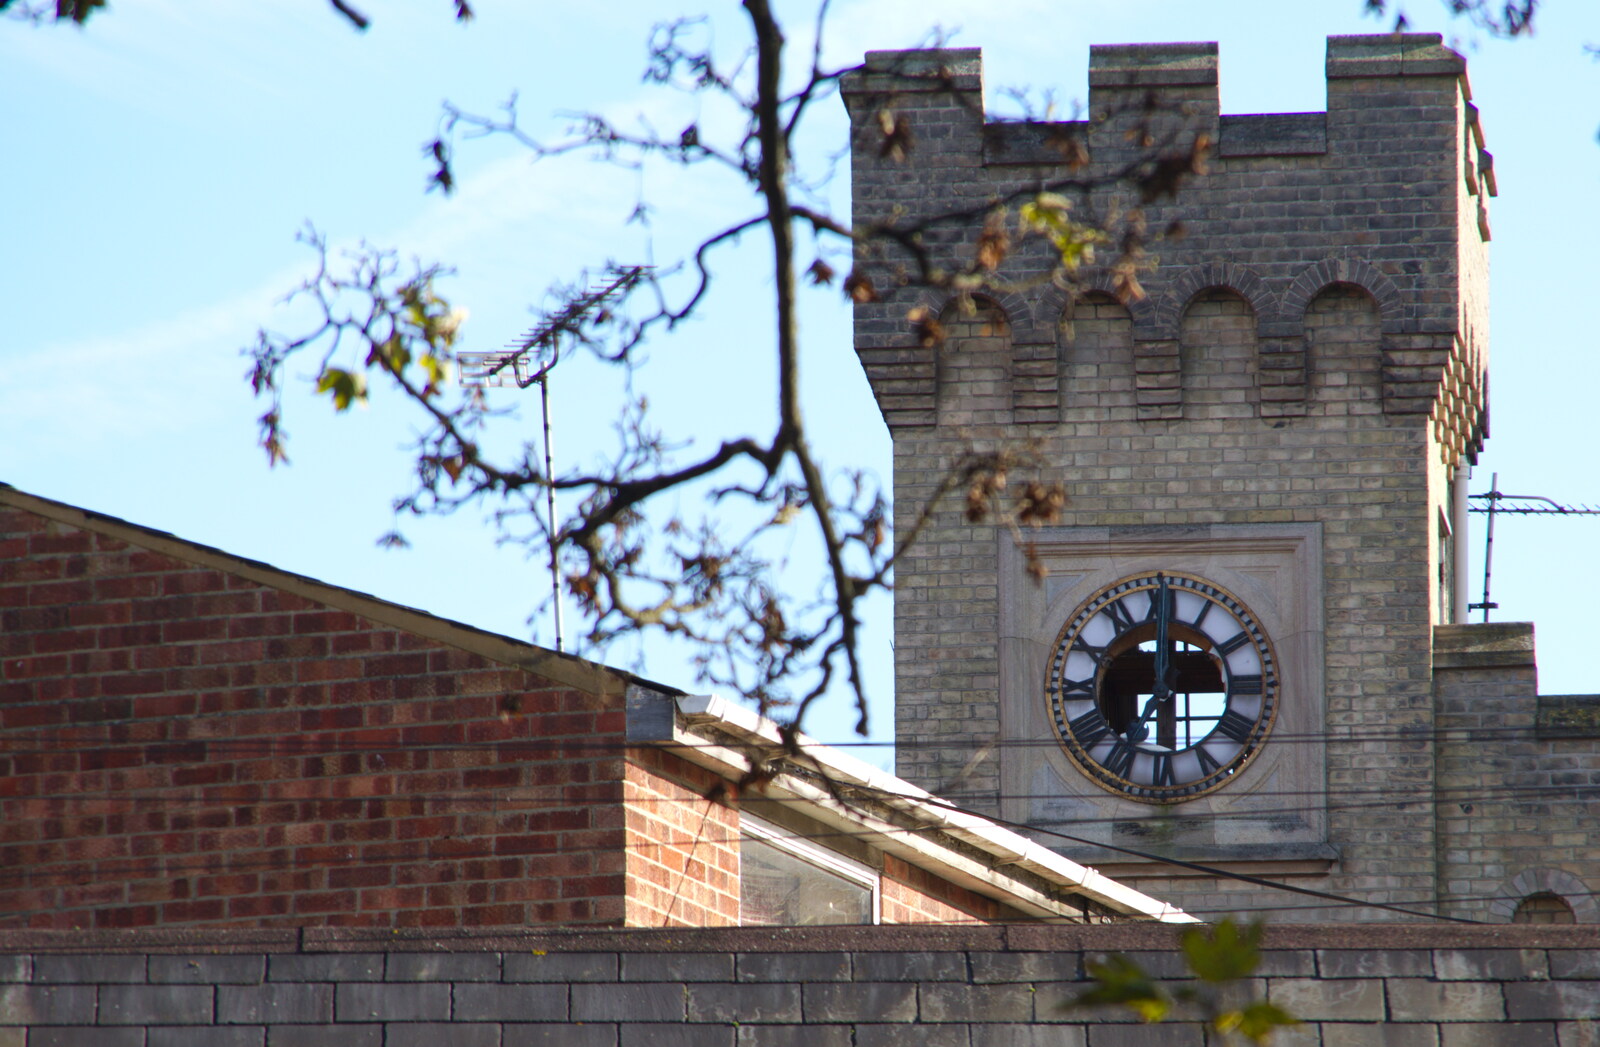 The wrecked clock face on St. Helen's Court tower from Exam Day Dereliction, Ipswich, Suffolk - 13th November 2019